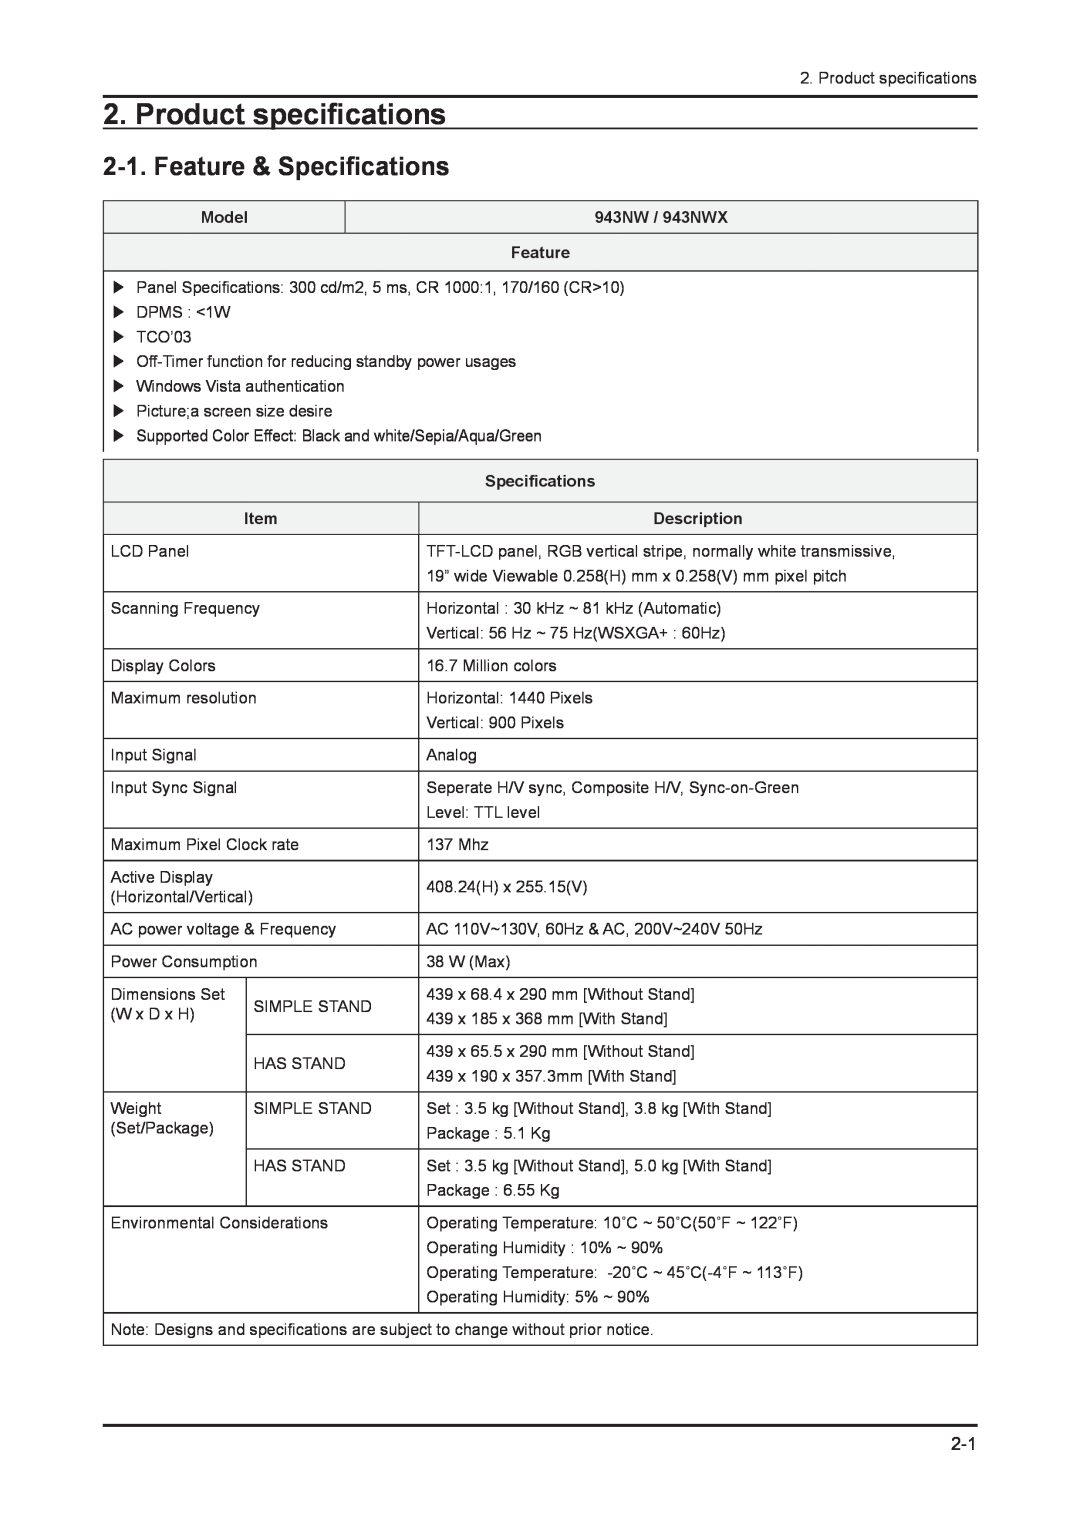 Samsung 943NWX service manual Product specifications, Feature & Specifications 